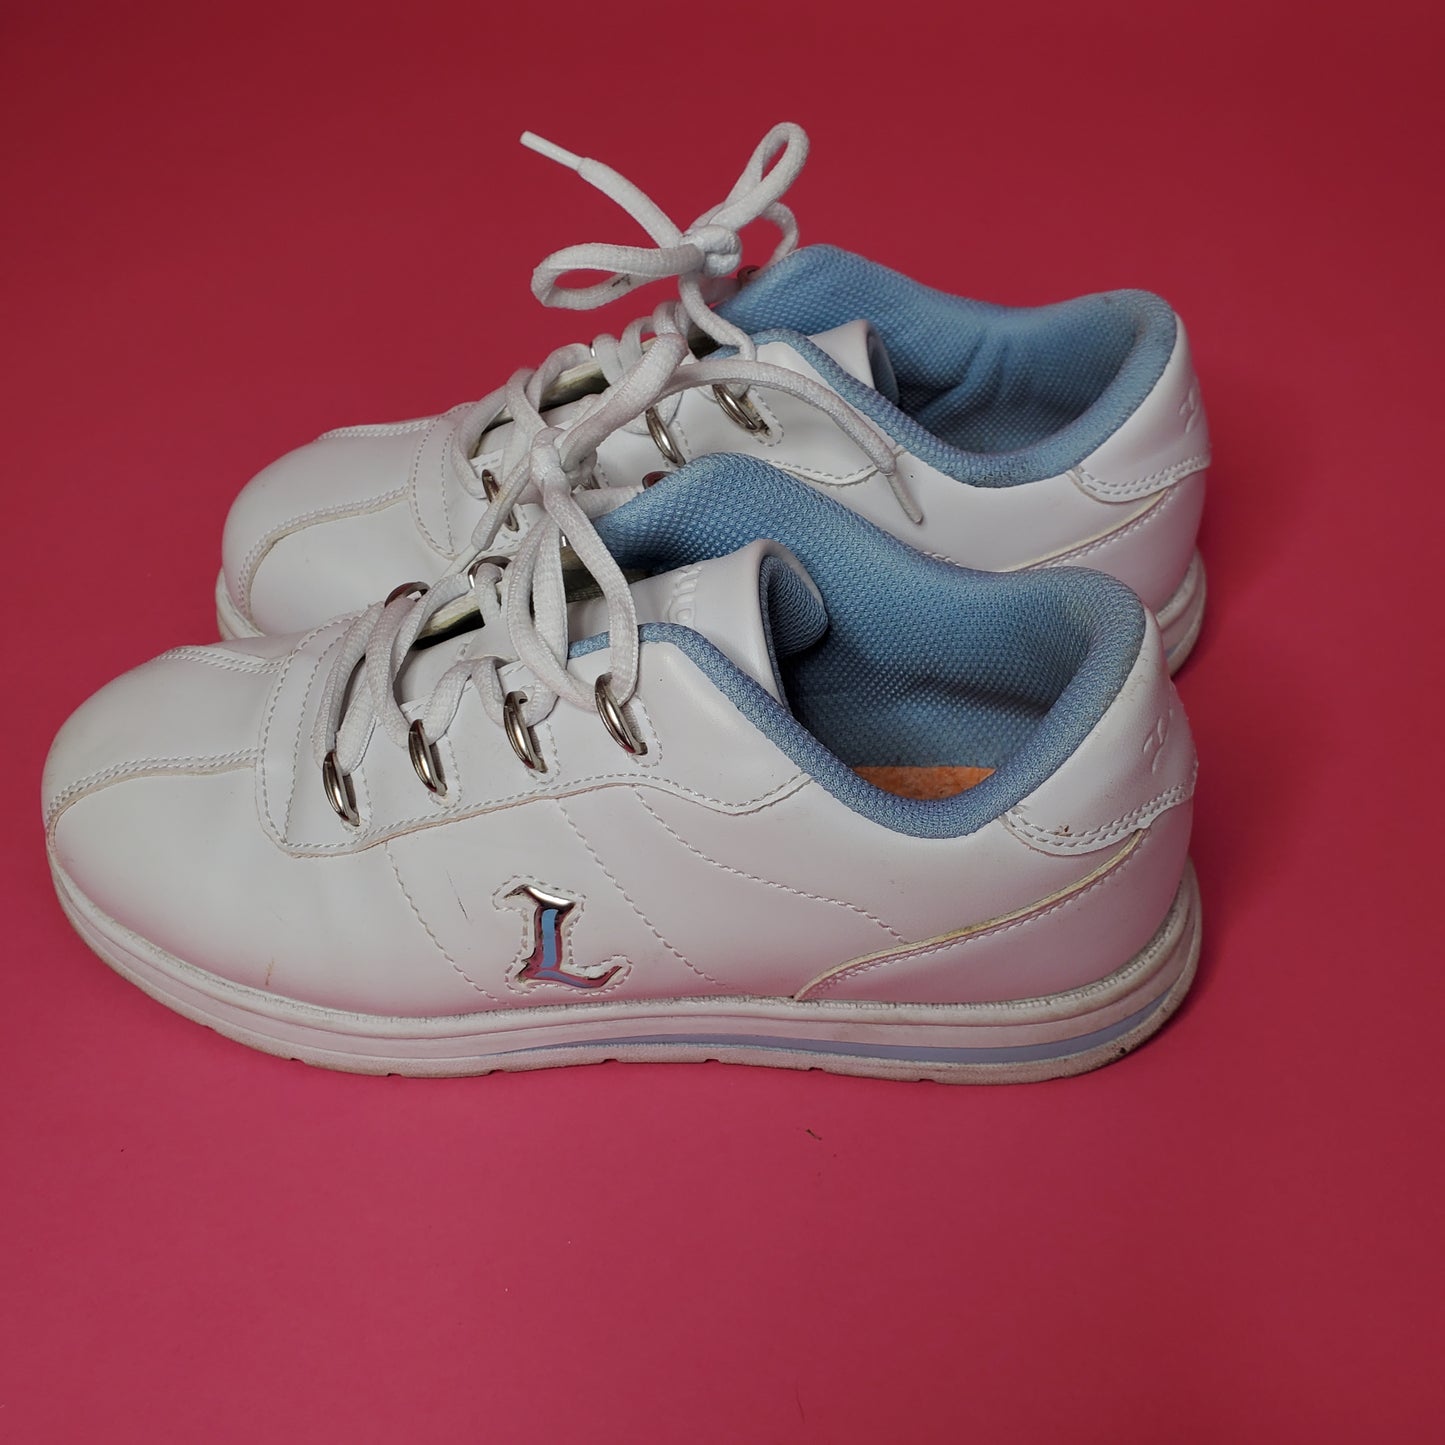 white/baby blue Lugz lowtop sneakers